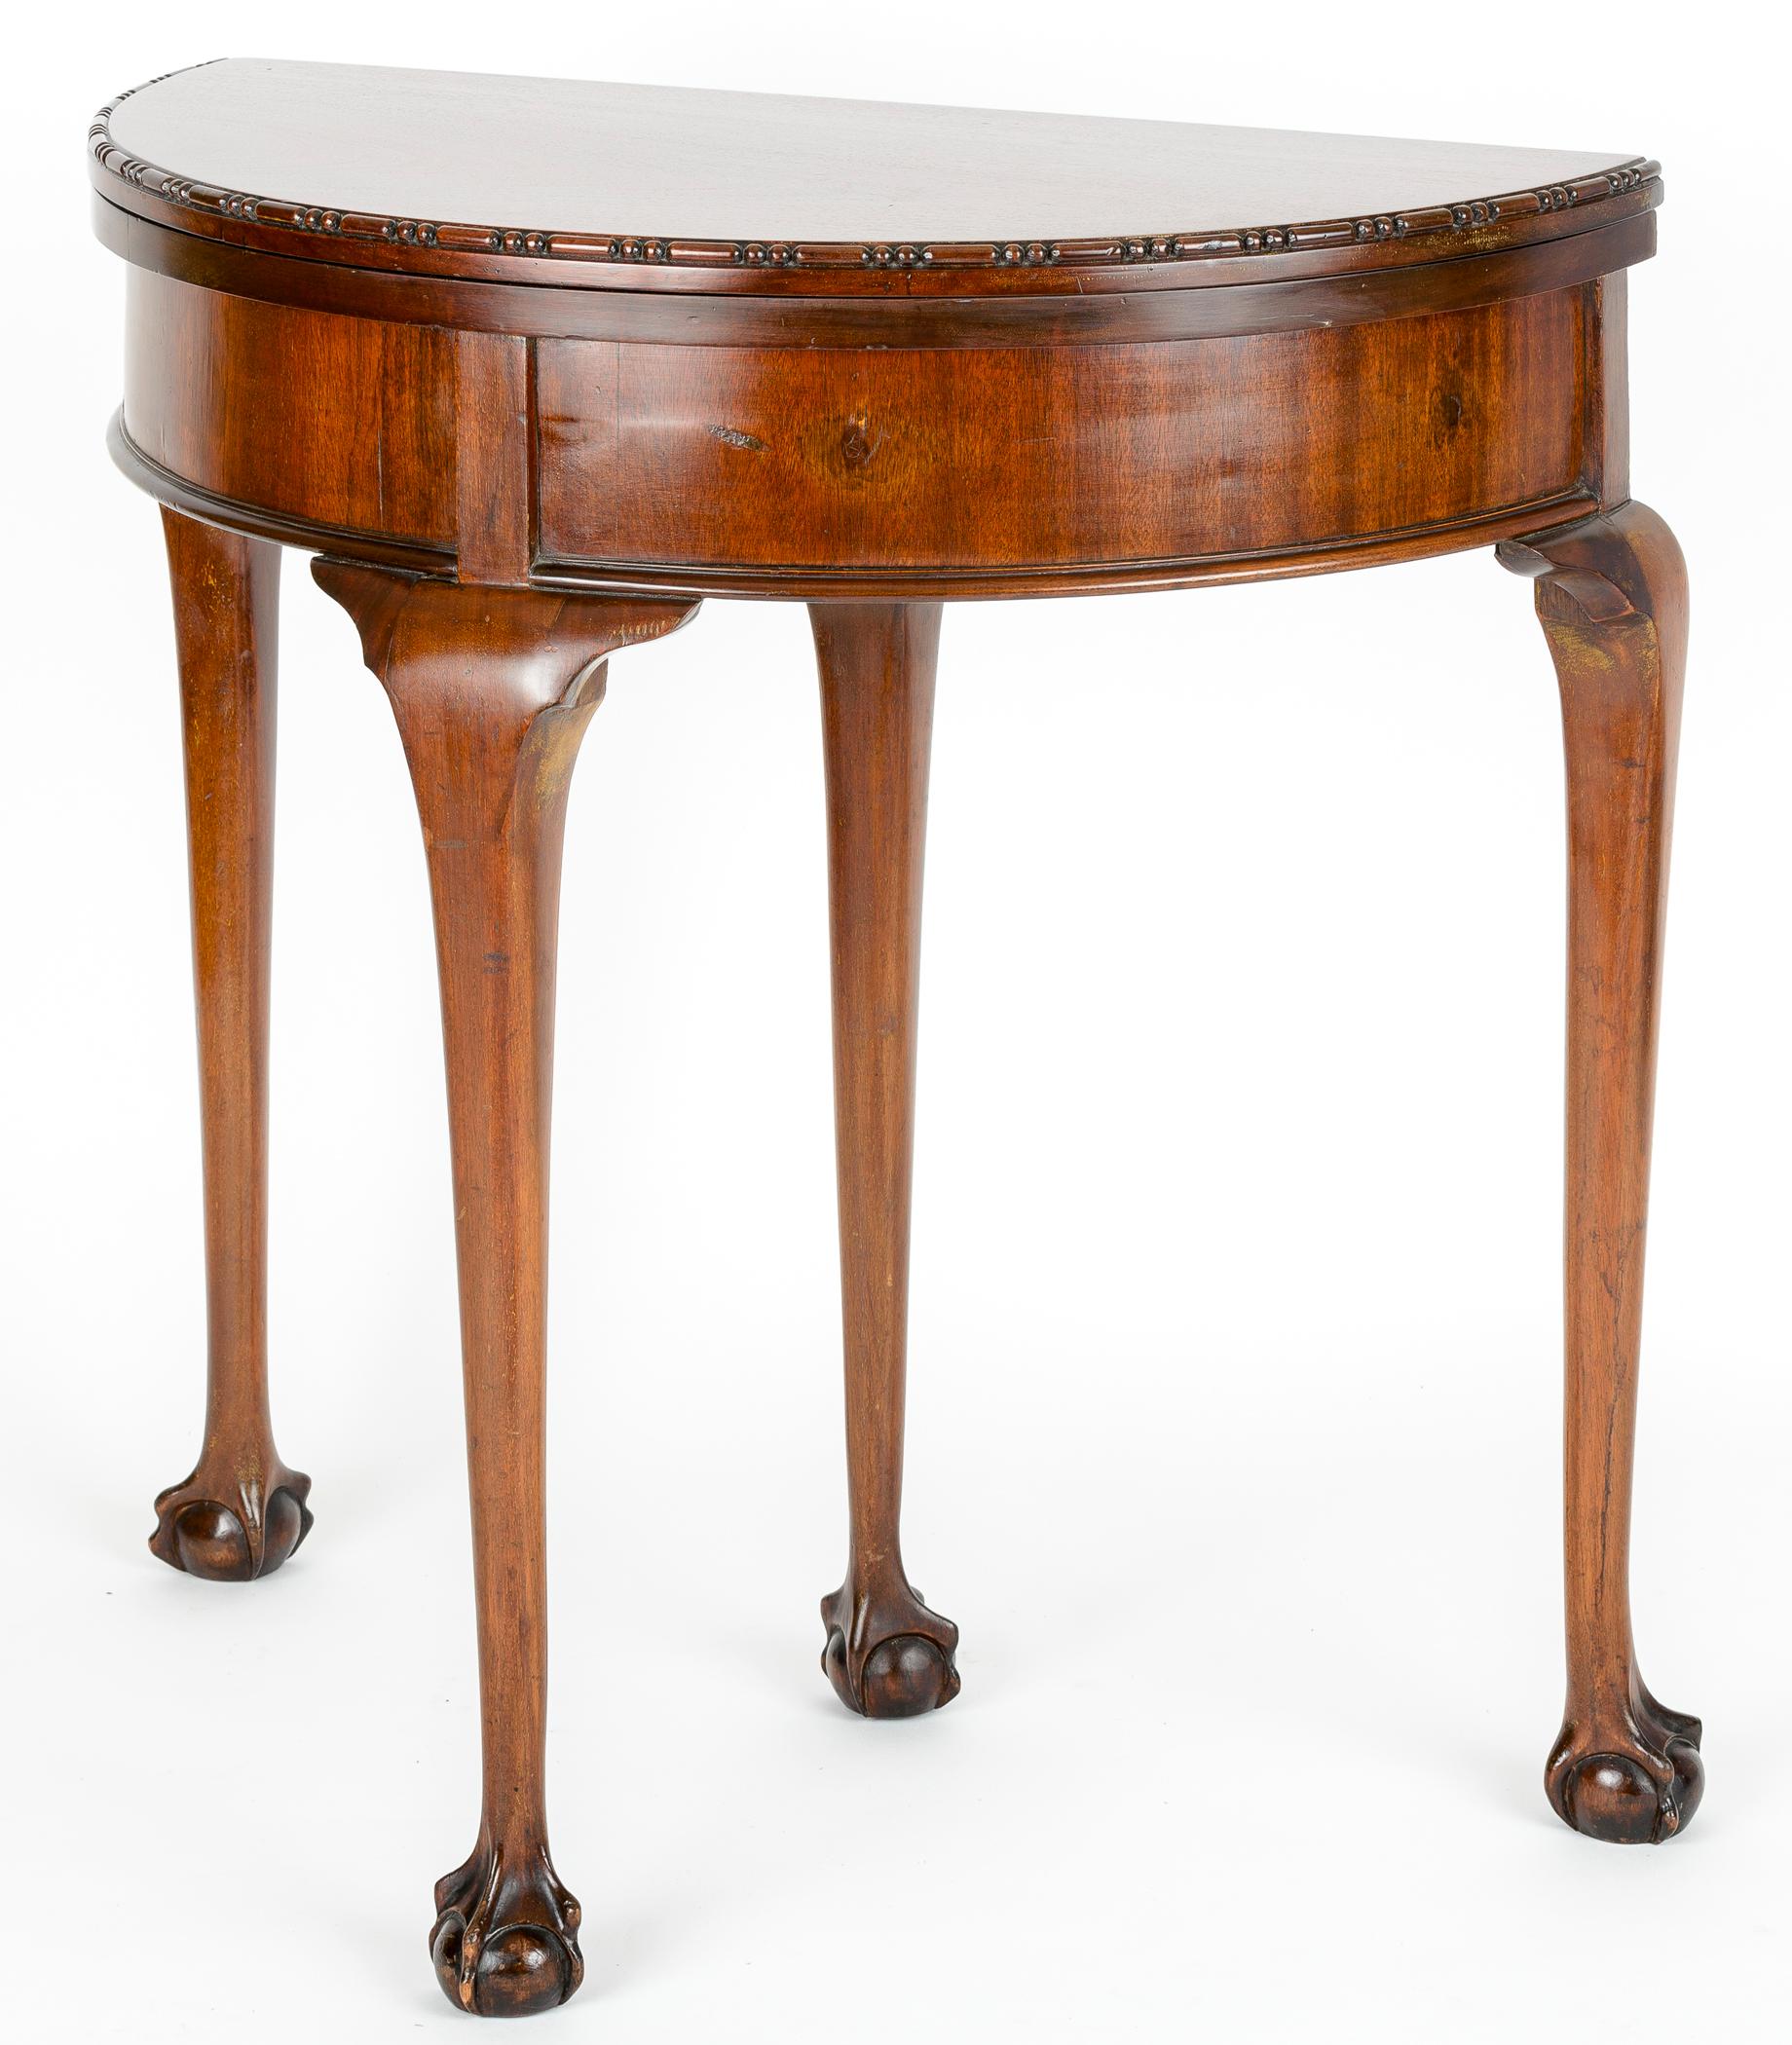 Mahogany demilune game table. The face top has a bead detail edge. The elongated cabriolet legs end in a nicely articulated ball and webbed foot. The fourth leg extends to support the fully opened top.
There is a small secret compartment that is